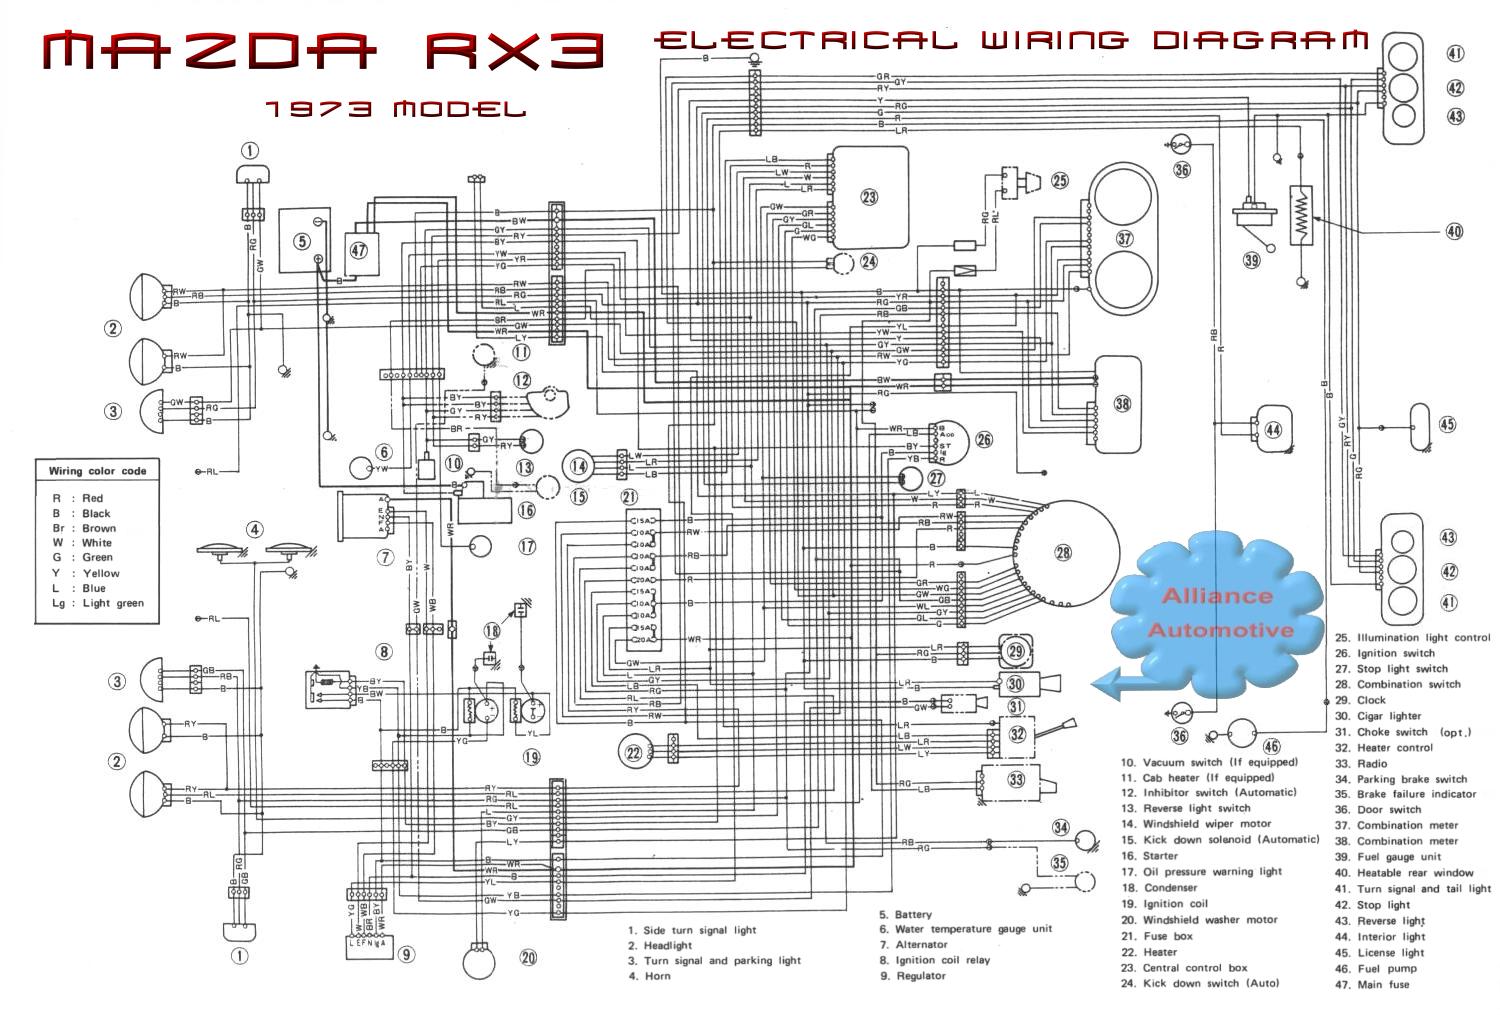 How do I fix my Electrical Problems? 2002 mazda 626 wiring diagrams 